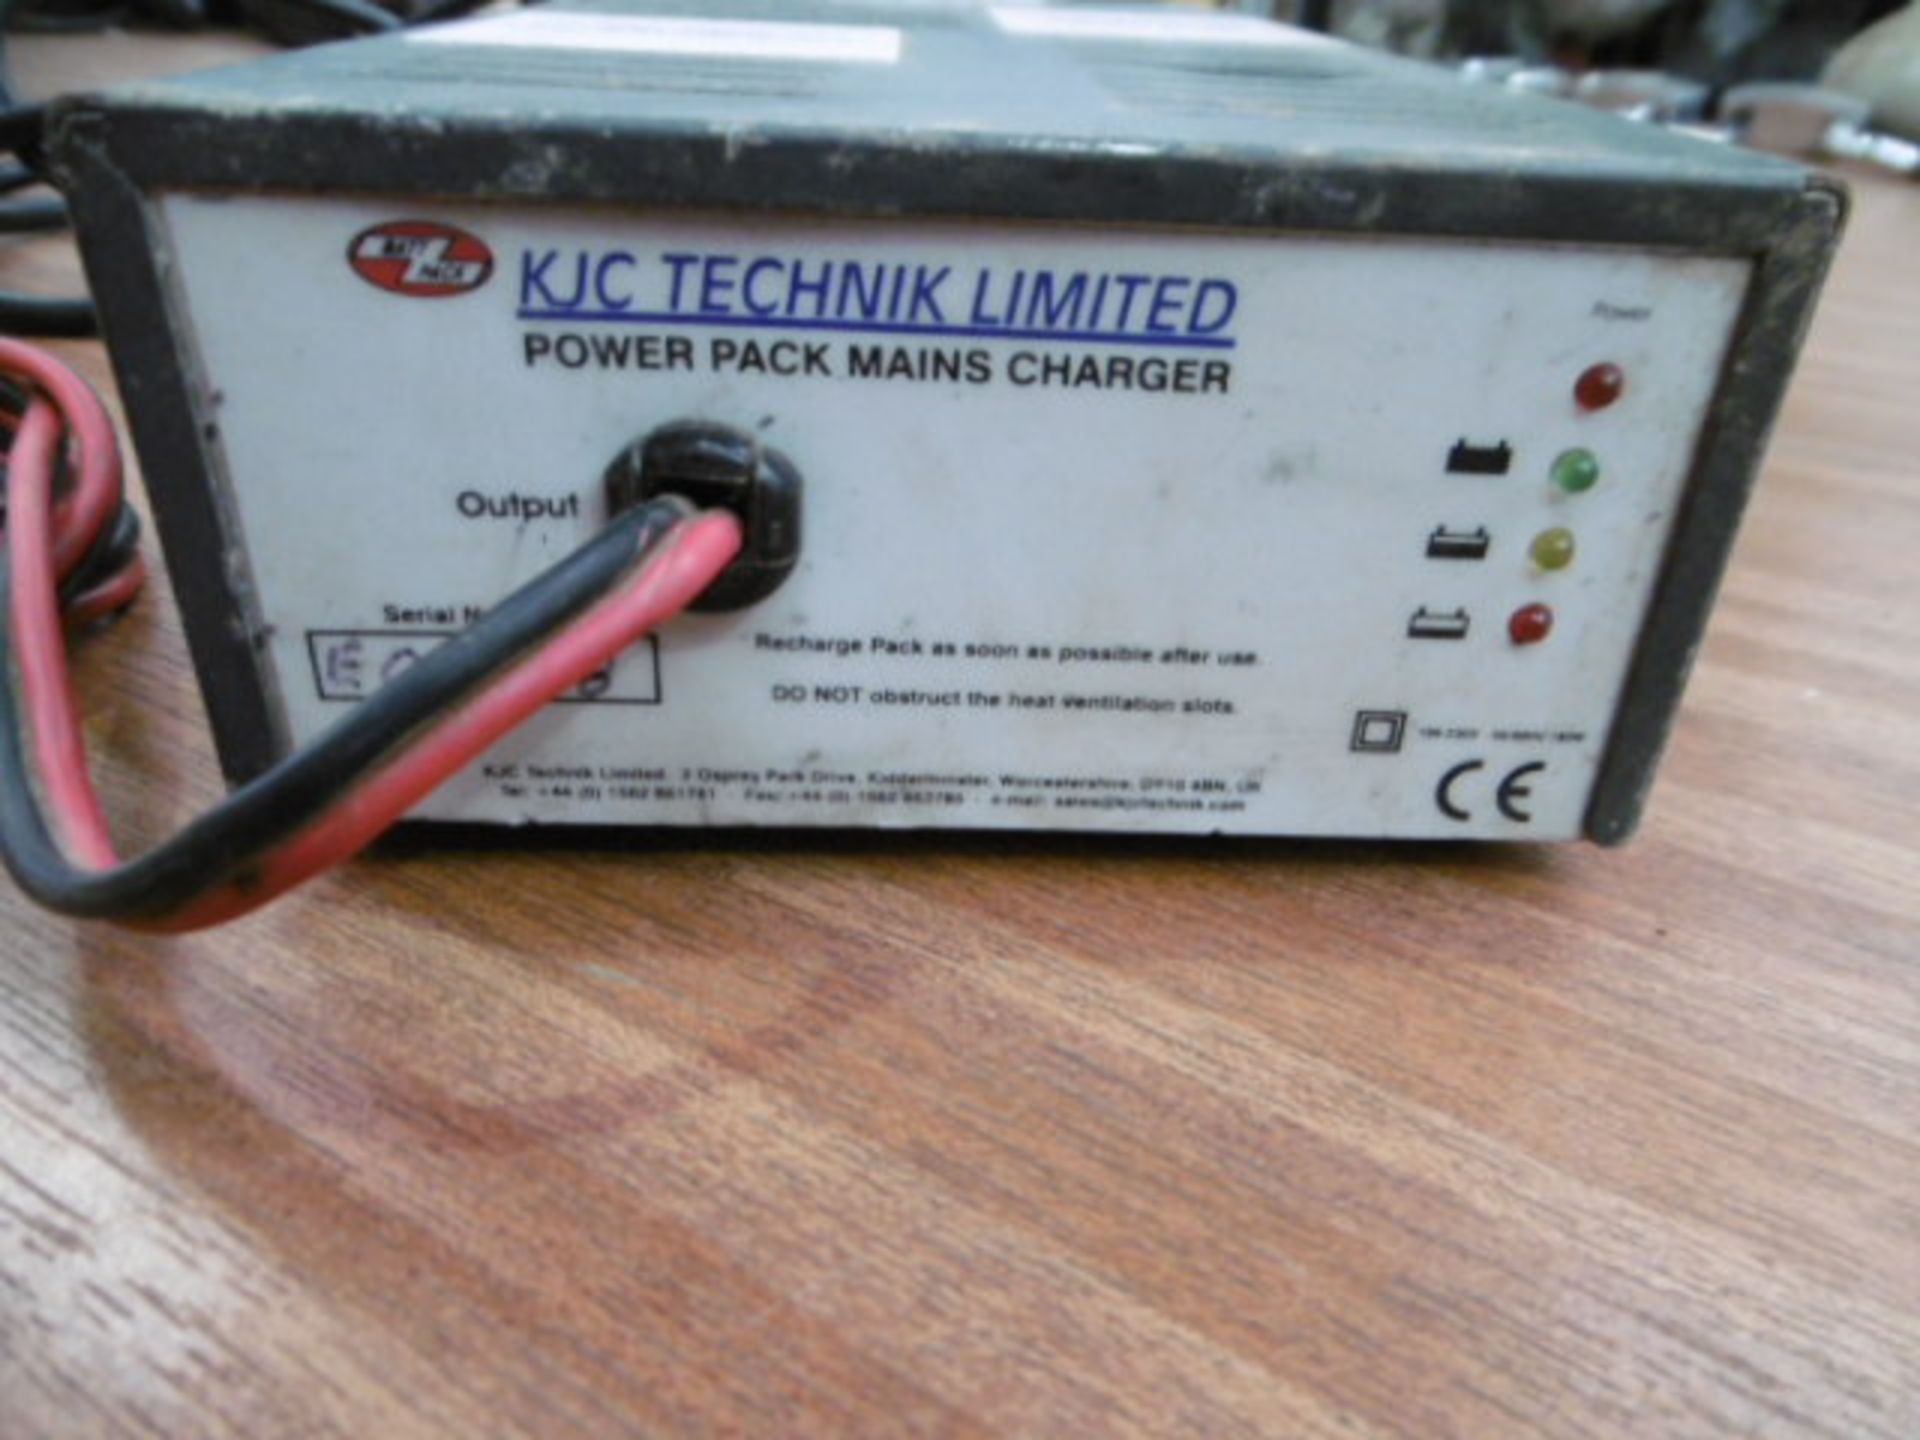 KJC Technick Power Pack Mains Charger - Image 2 of 3